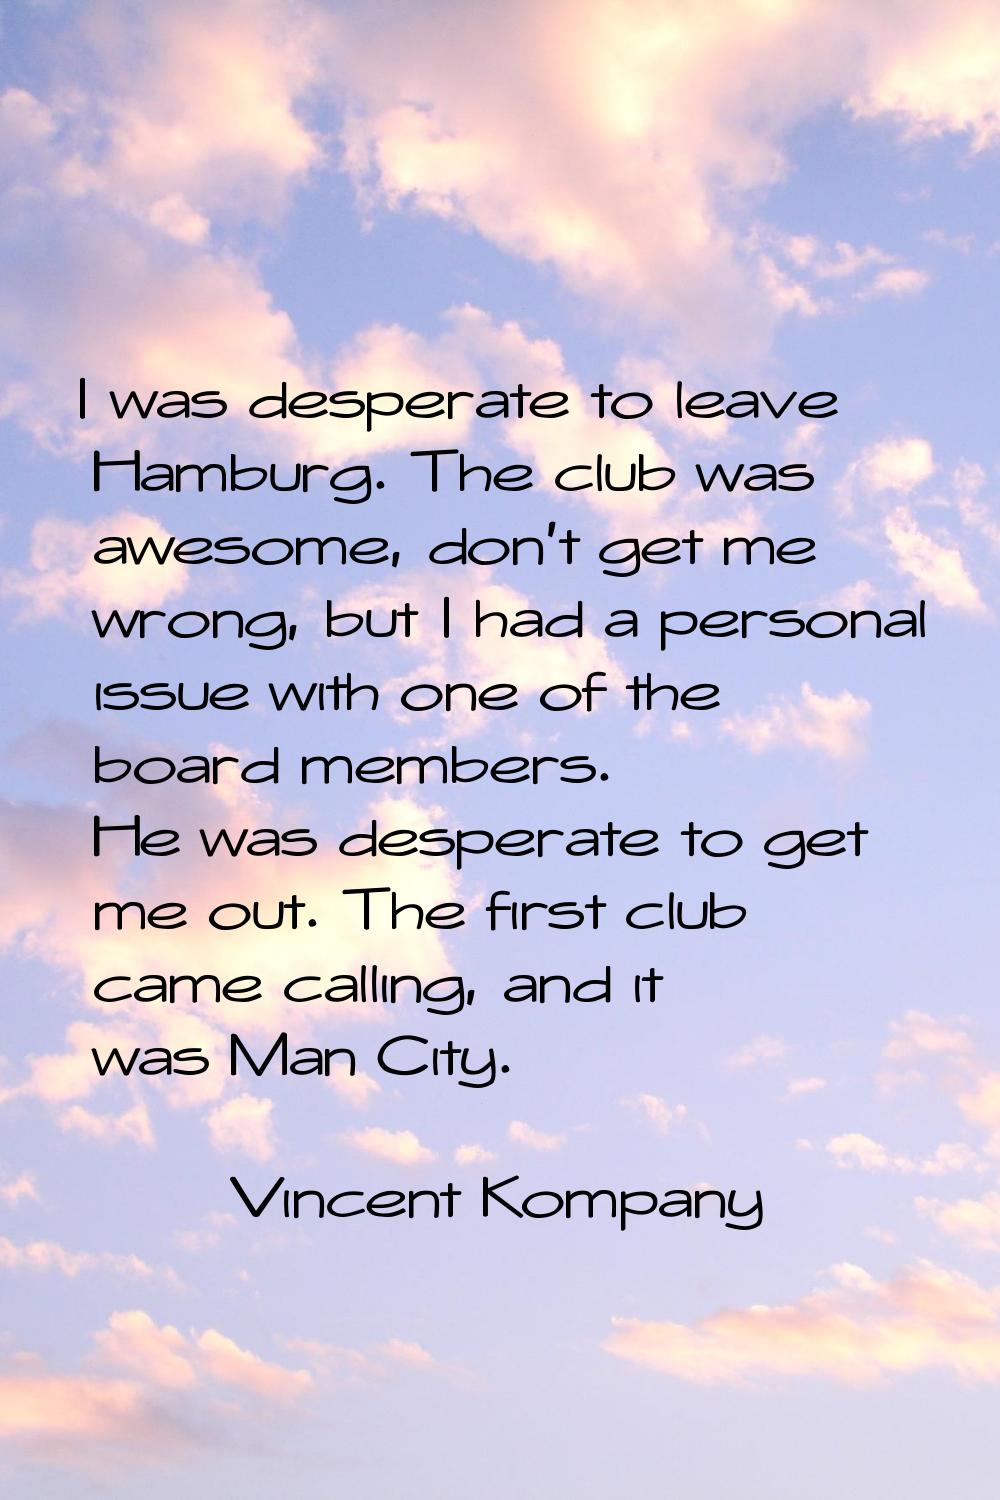 I was desperate to leave Hamburg. The club was awesome, don't get me wrong, but I had a personal is